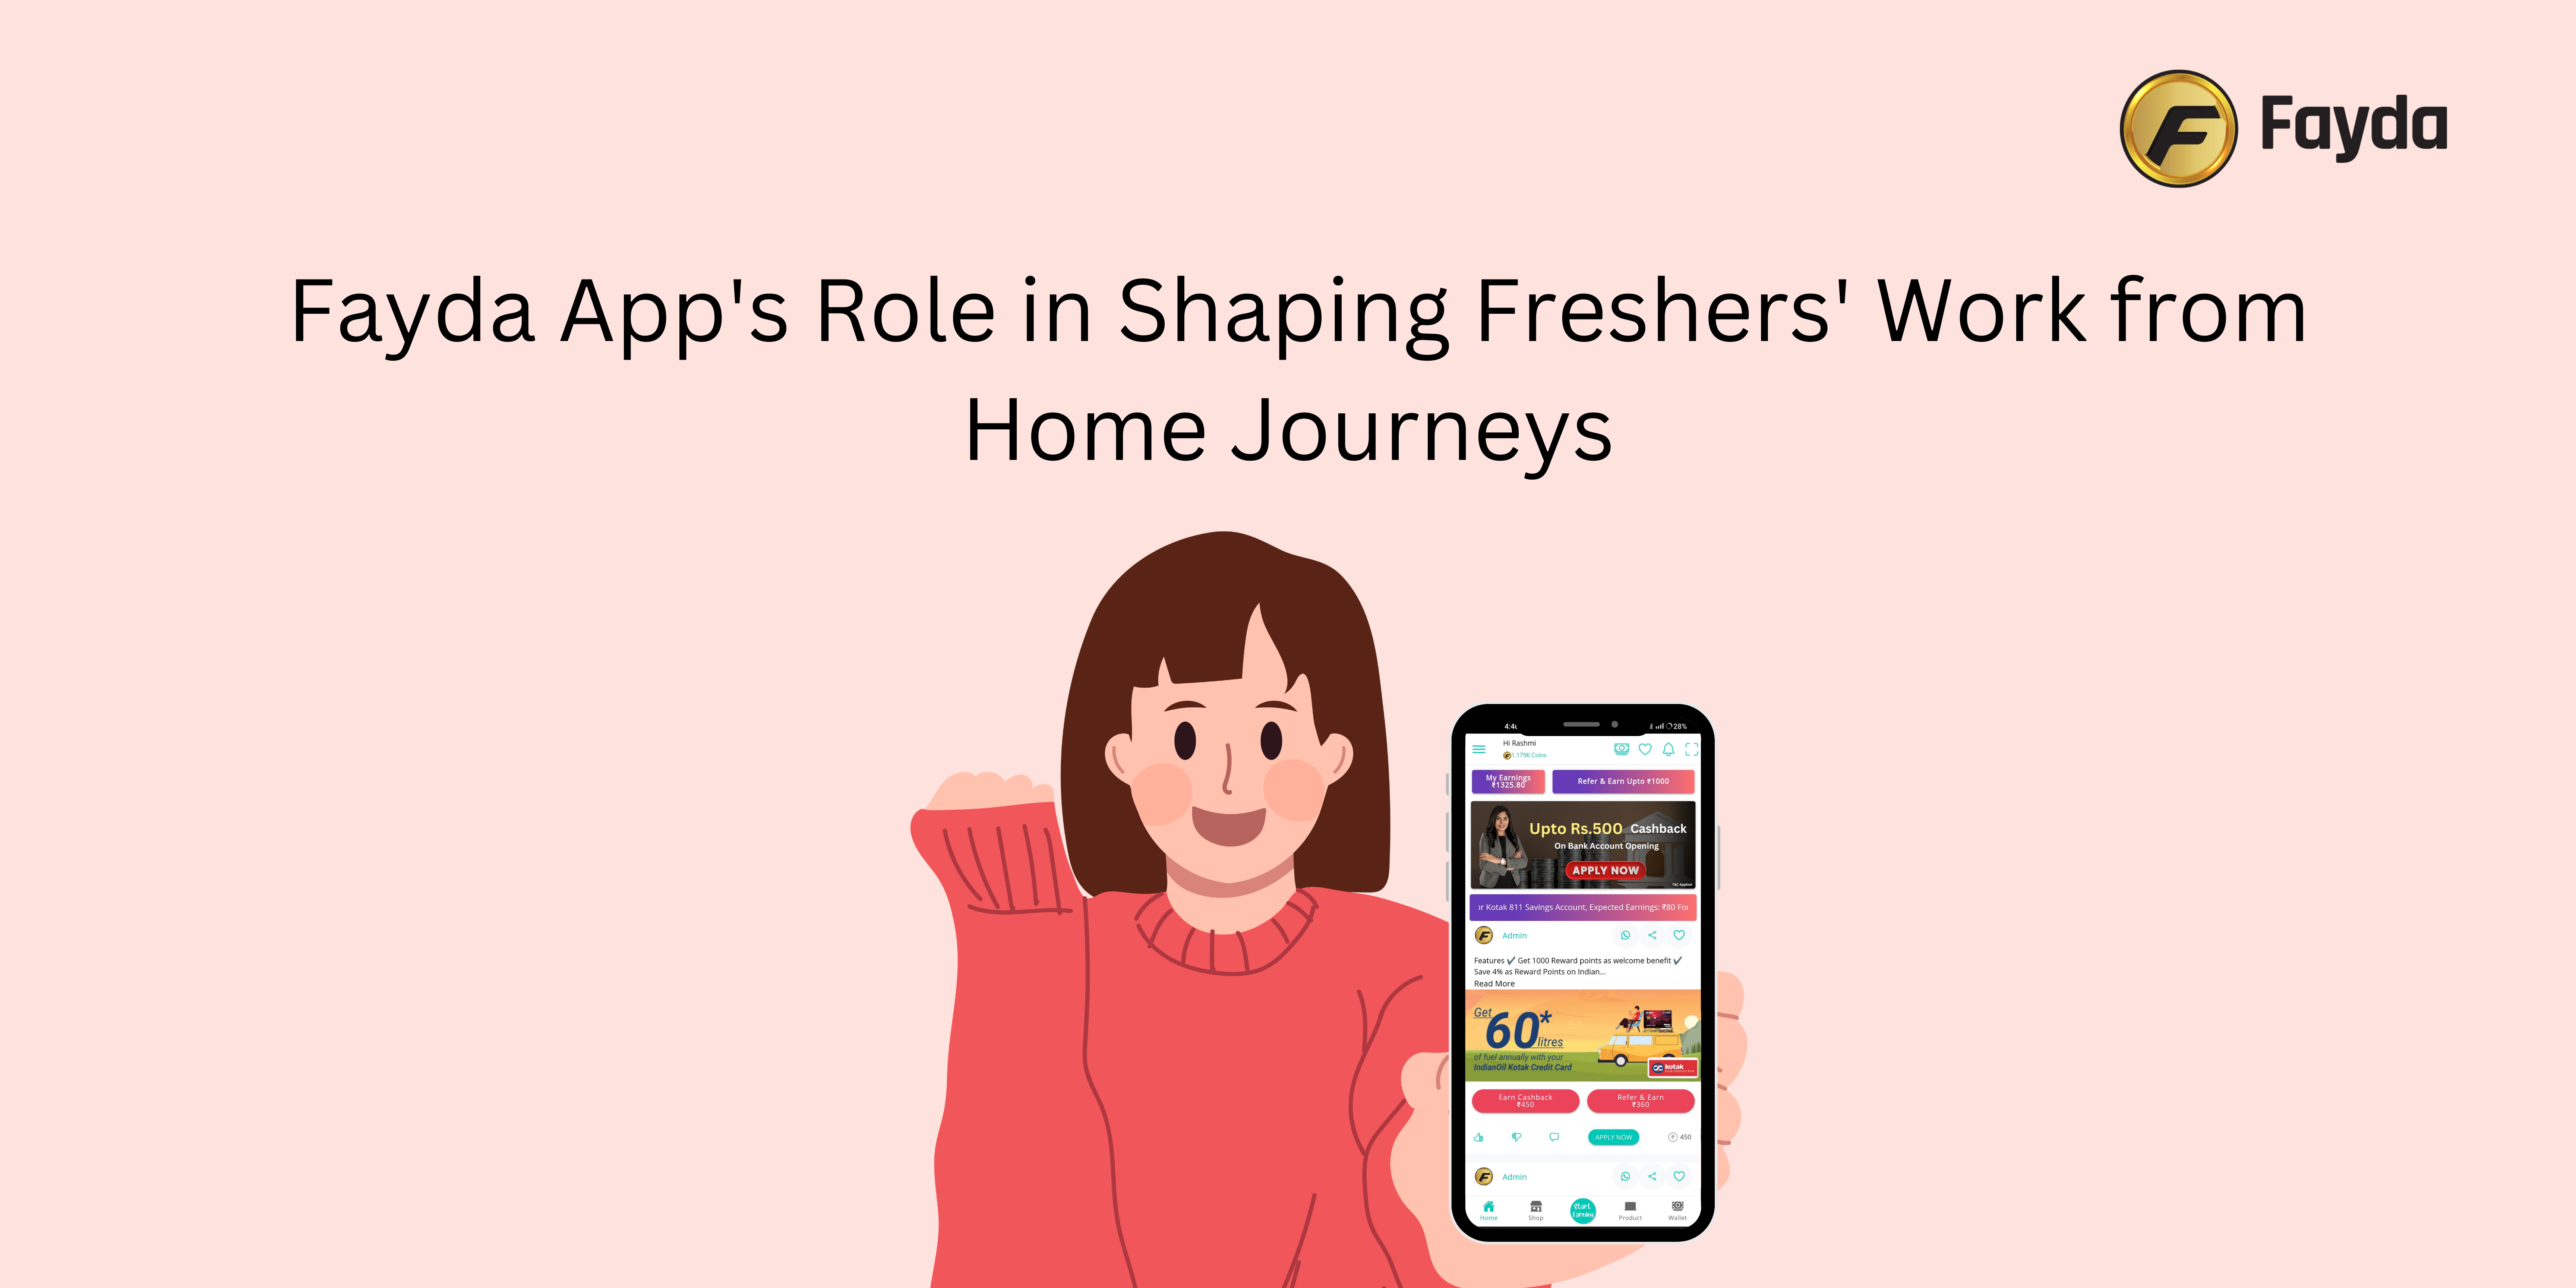 Fayda App's Role in Shaping Freshers' Work from Home Journeys